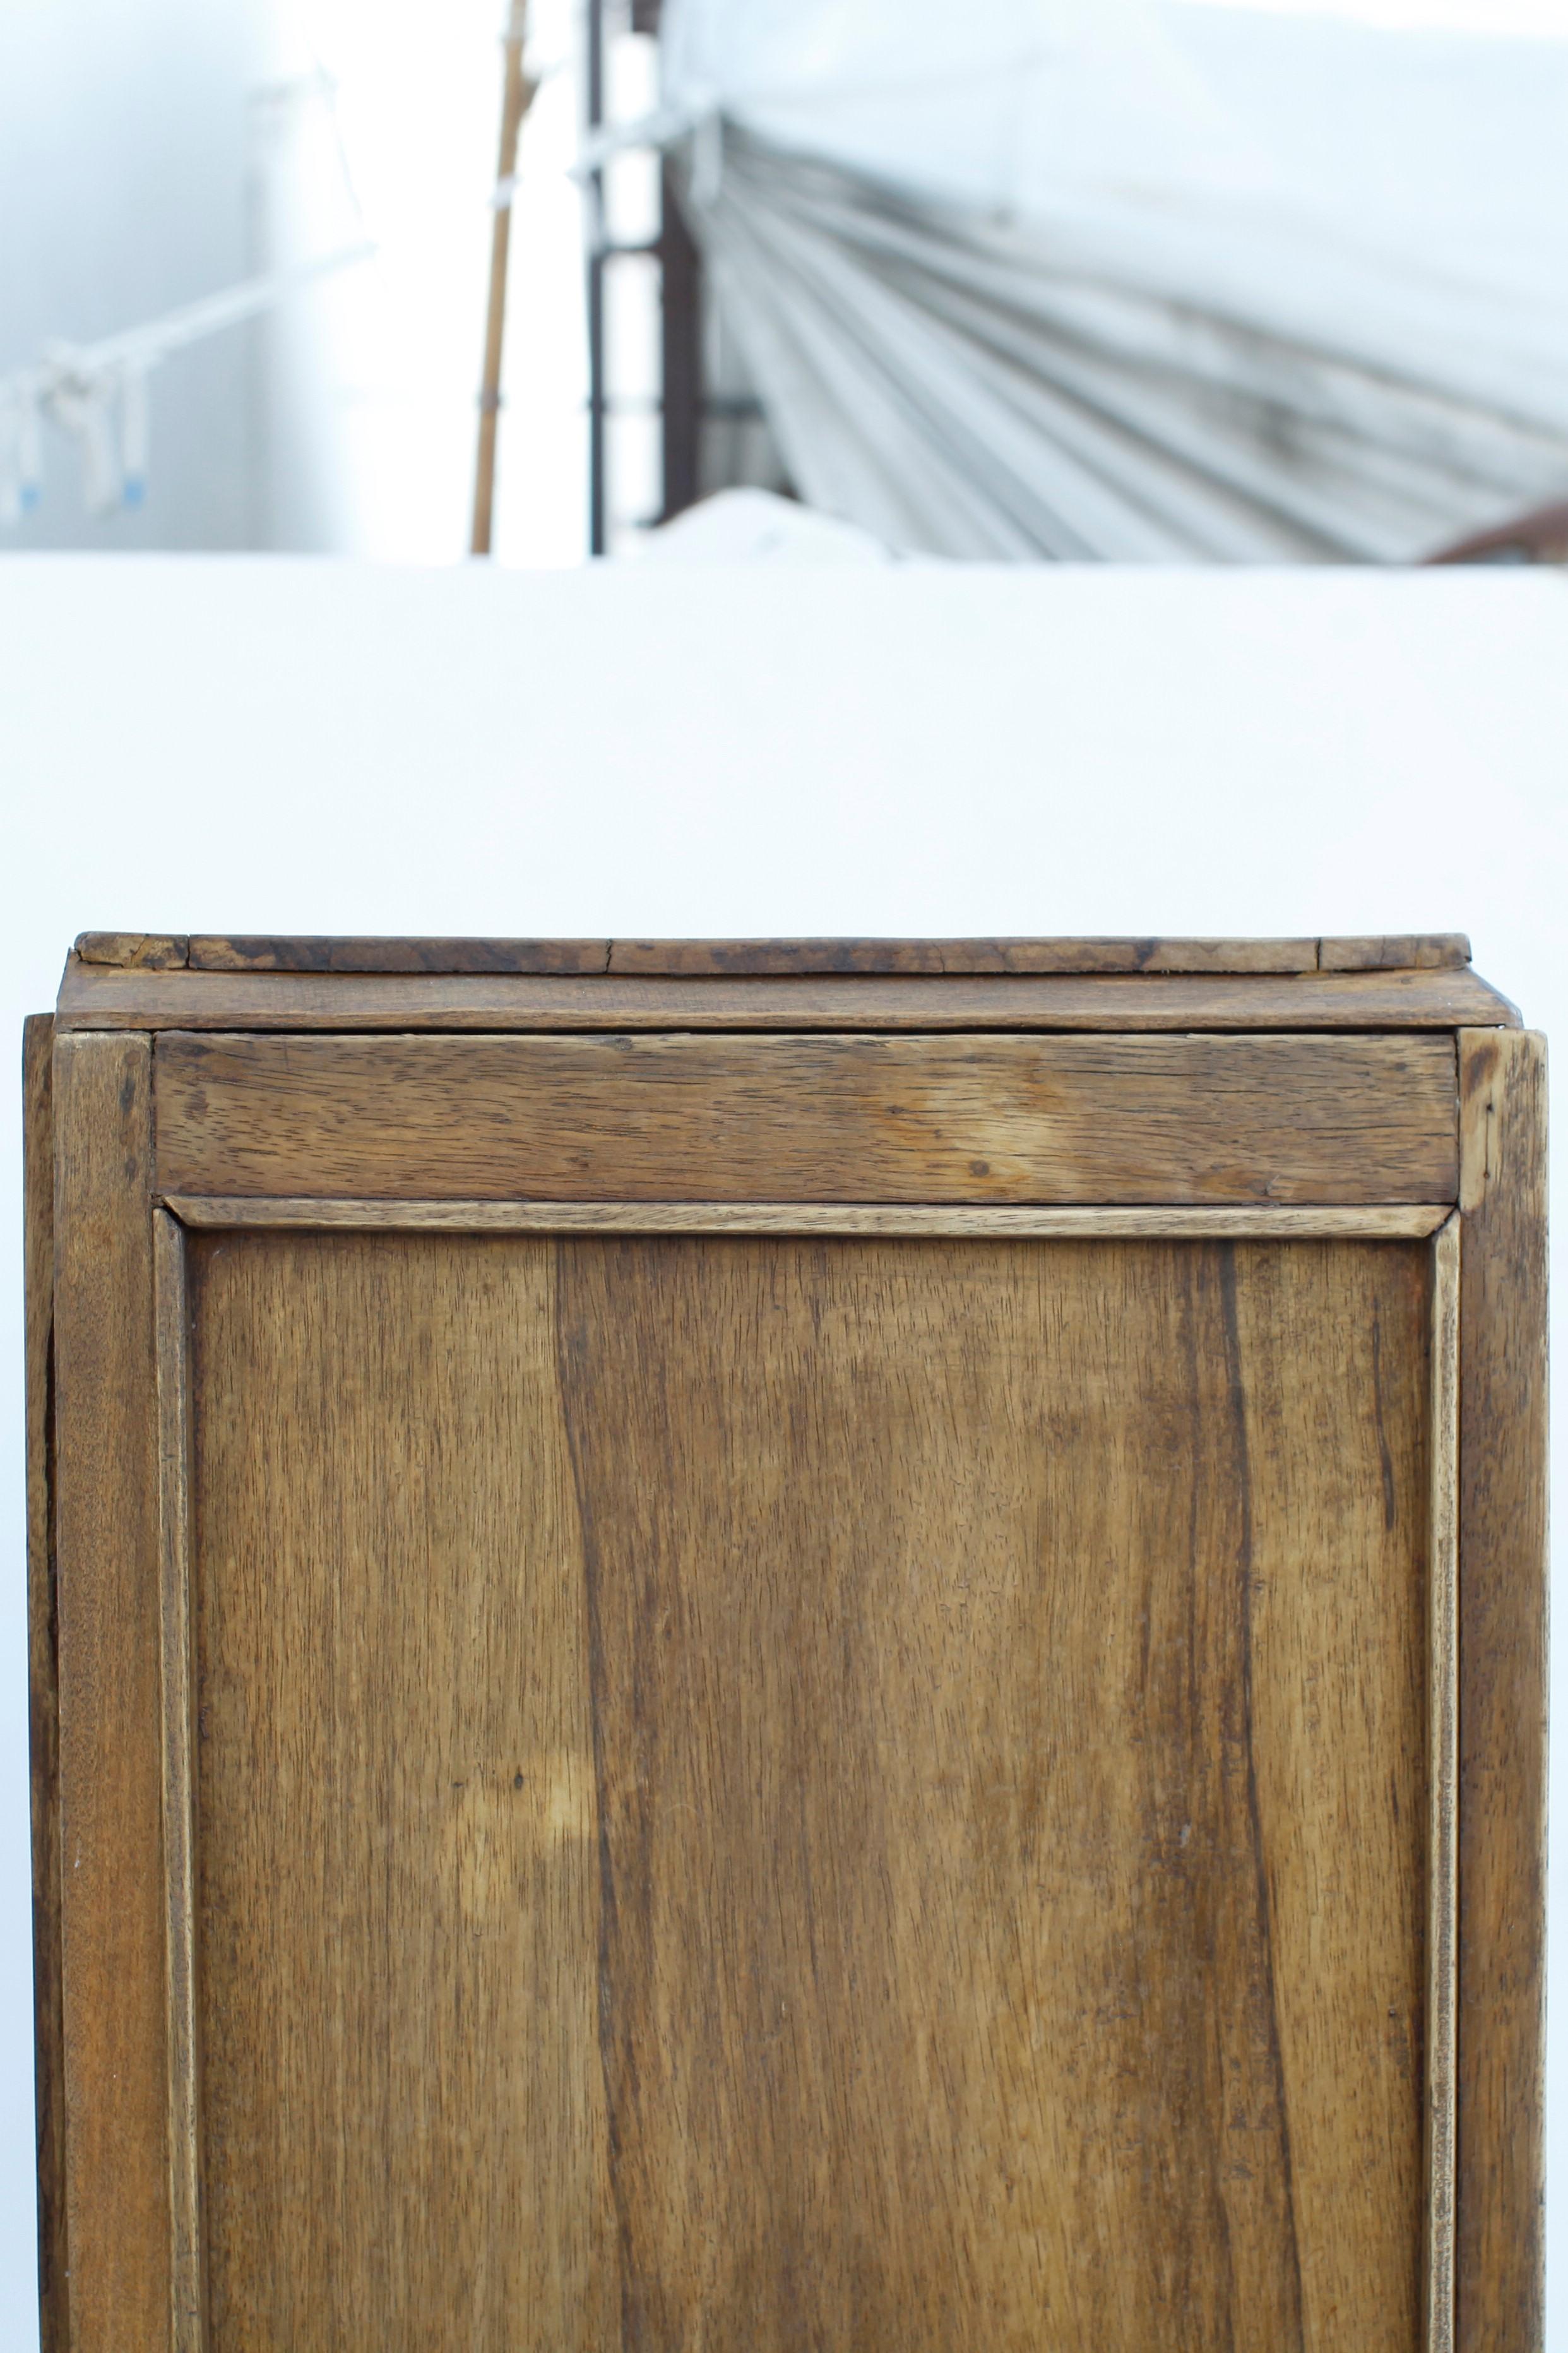 French Colonial Weathered Teak Cabinet with Metal Screen Doors 1930's For Sale 2